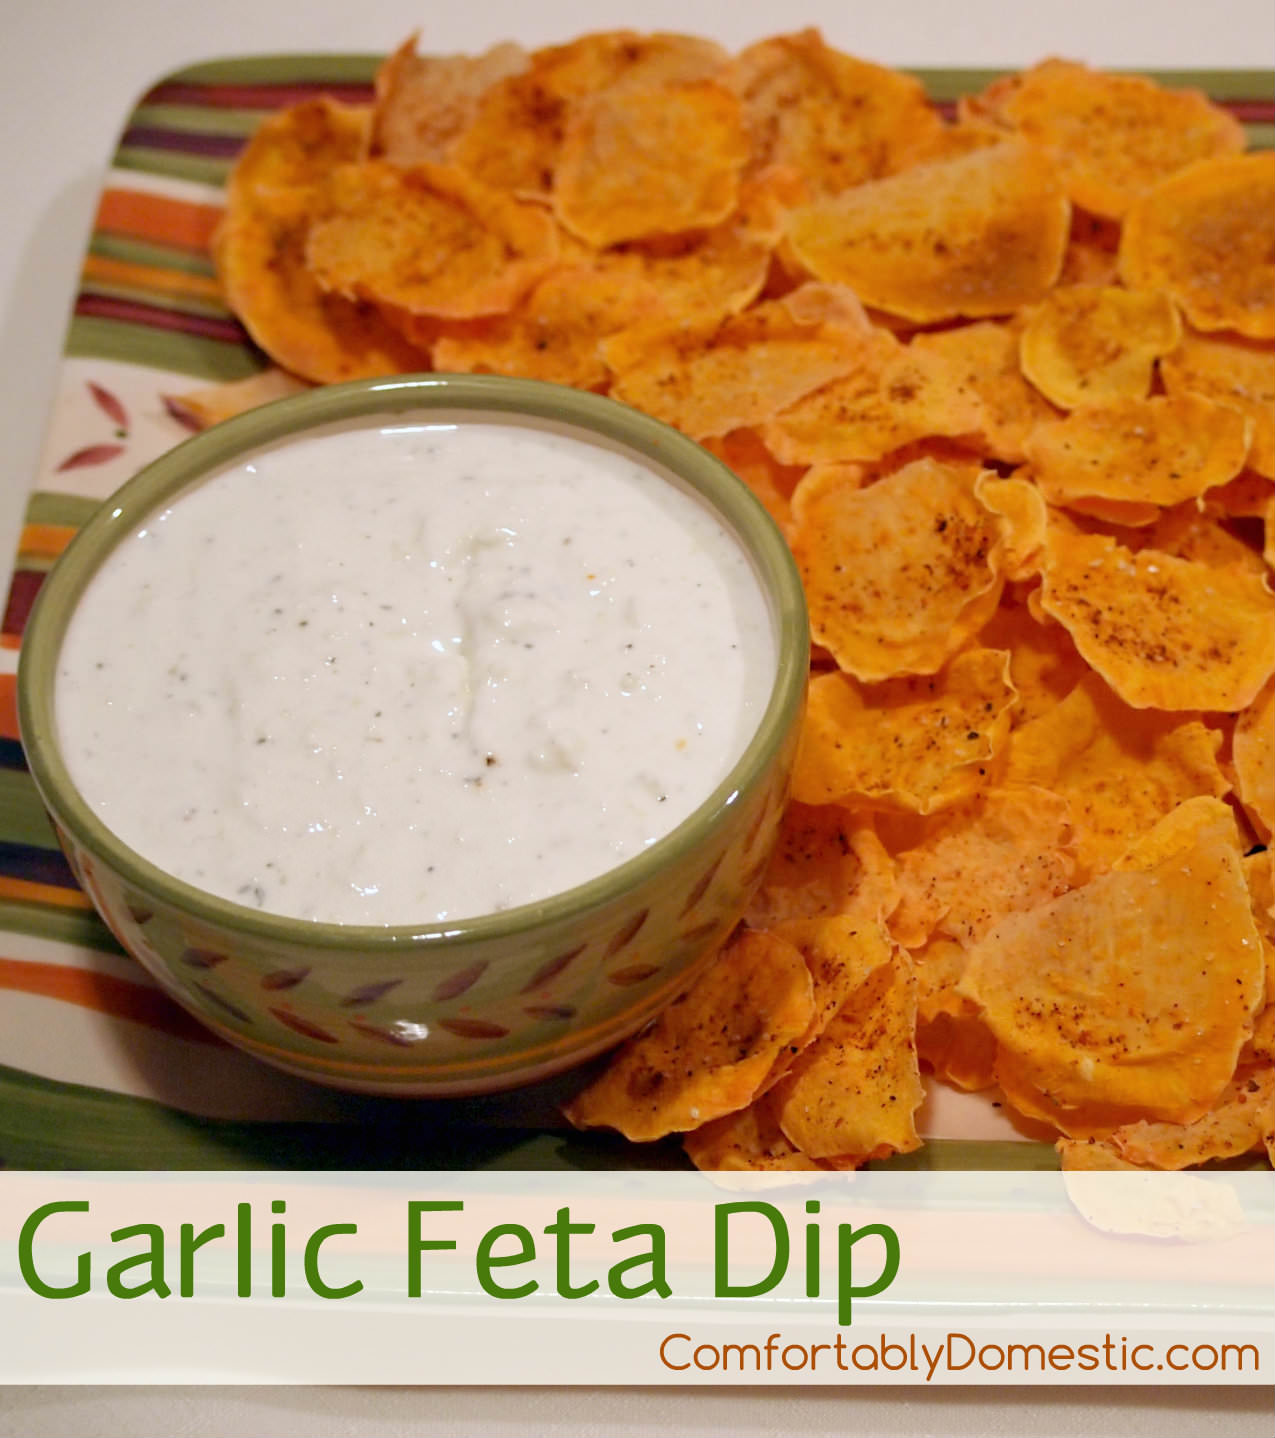 Garlic Feta Dip | ComfortablyDomestic.com is five minutes to fabulous for this delicious, light appetizer made with feta cheese, Greek yogurt, and plenty of garlic and herbs. 